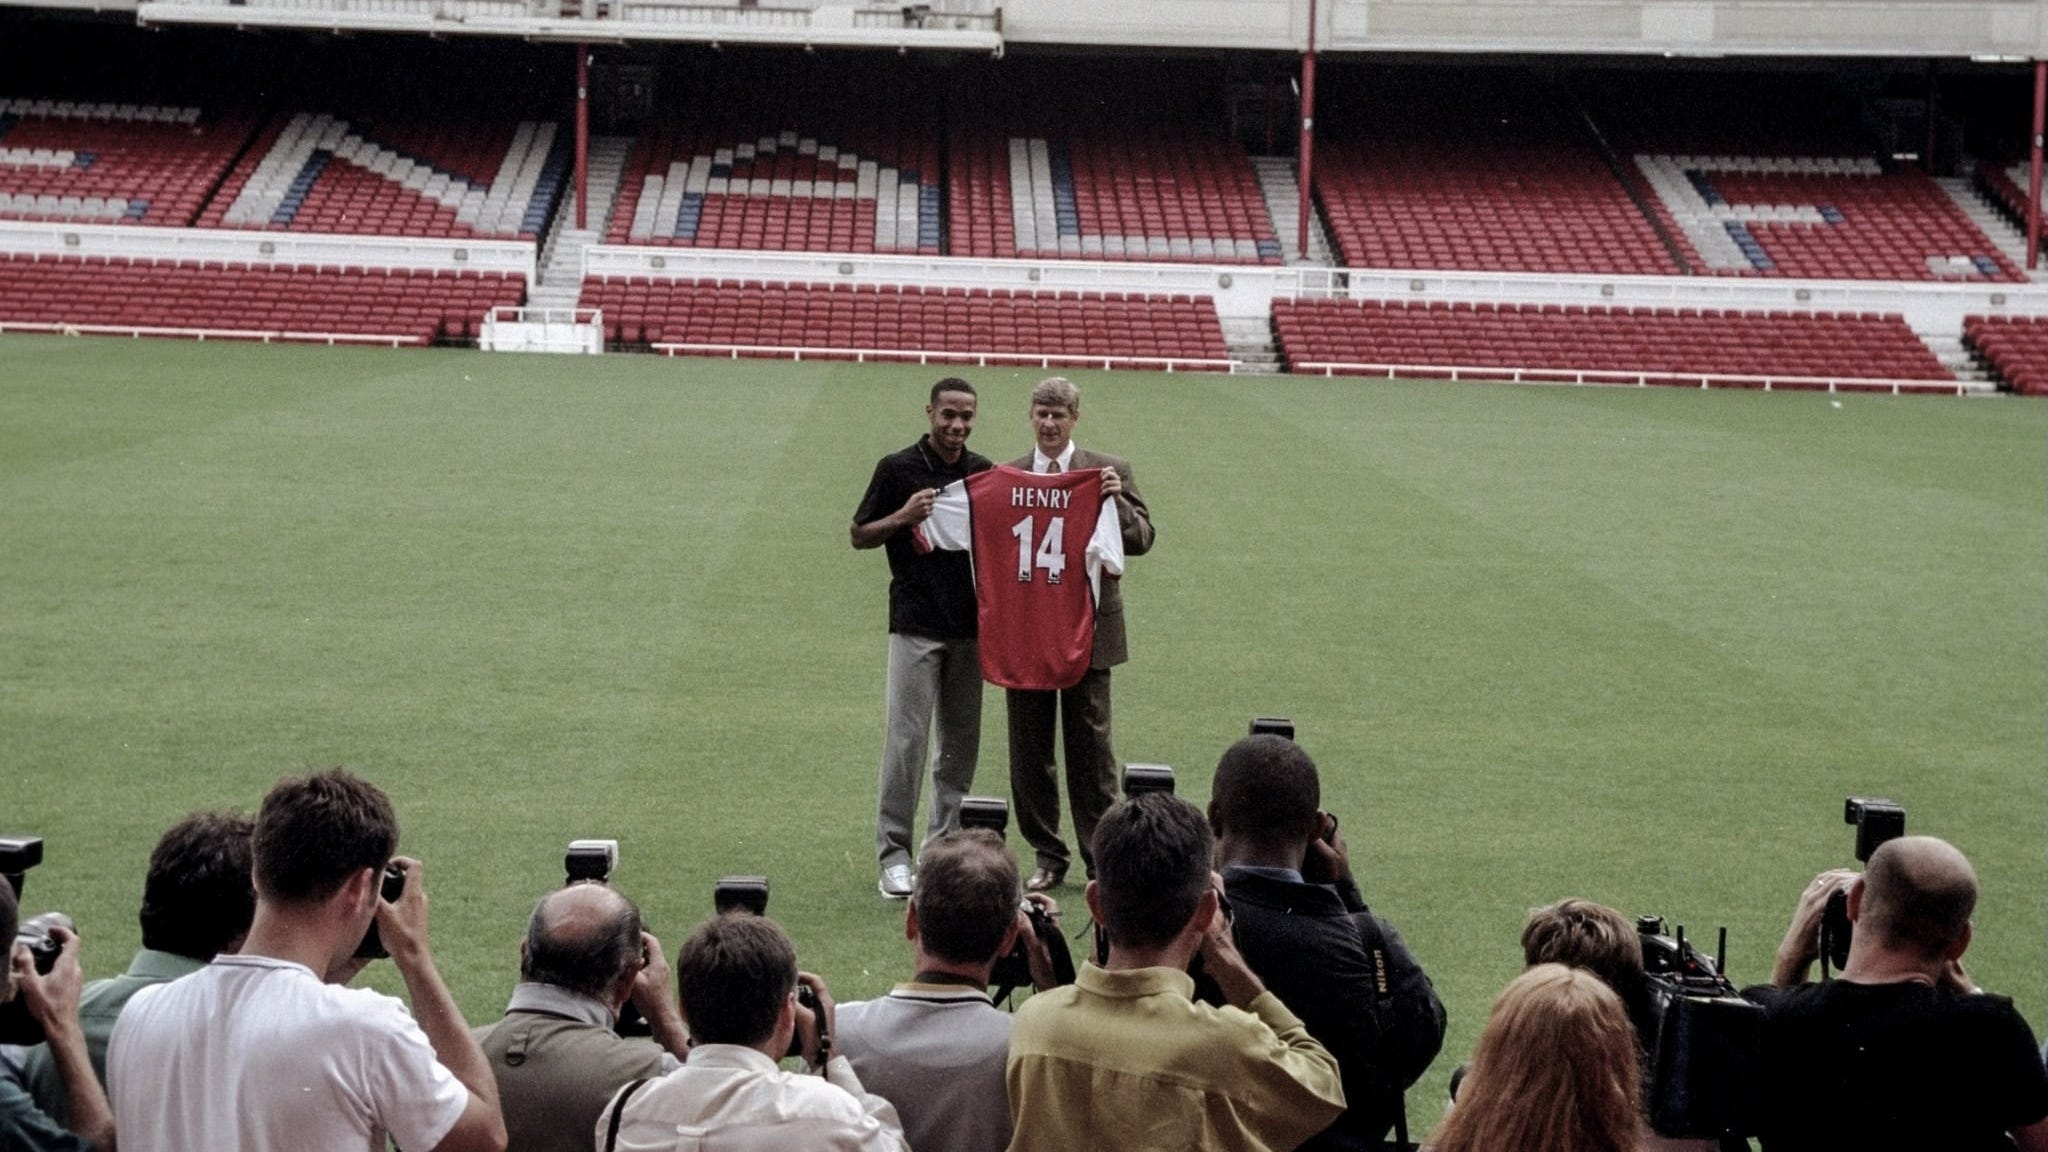 A wide-frame photo of Thierry Henry and Arsène Wenger holding up an Arsenal shirt, stood on the Highbury pich, with a line of photographers in the foreground